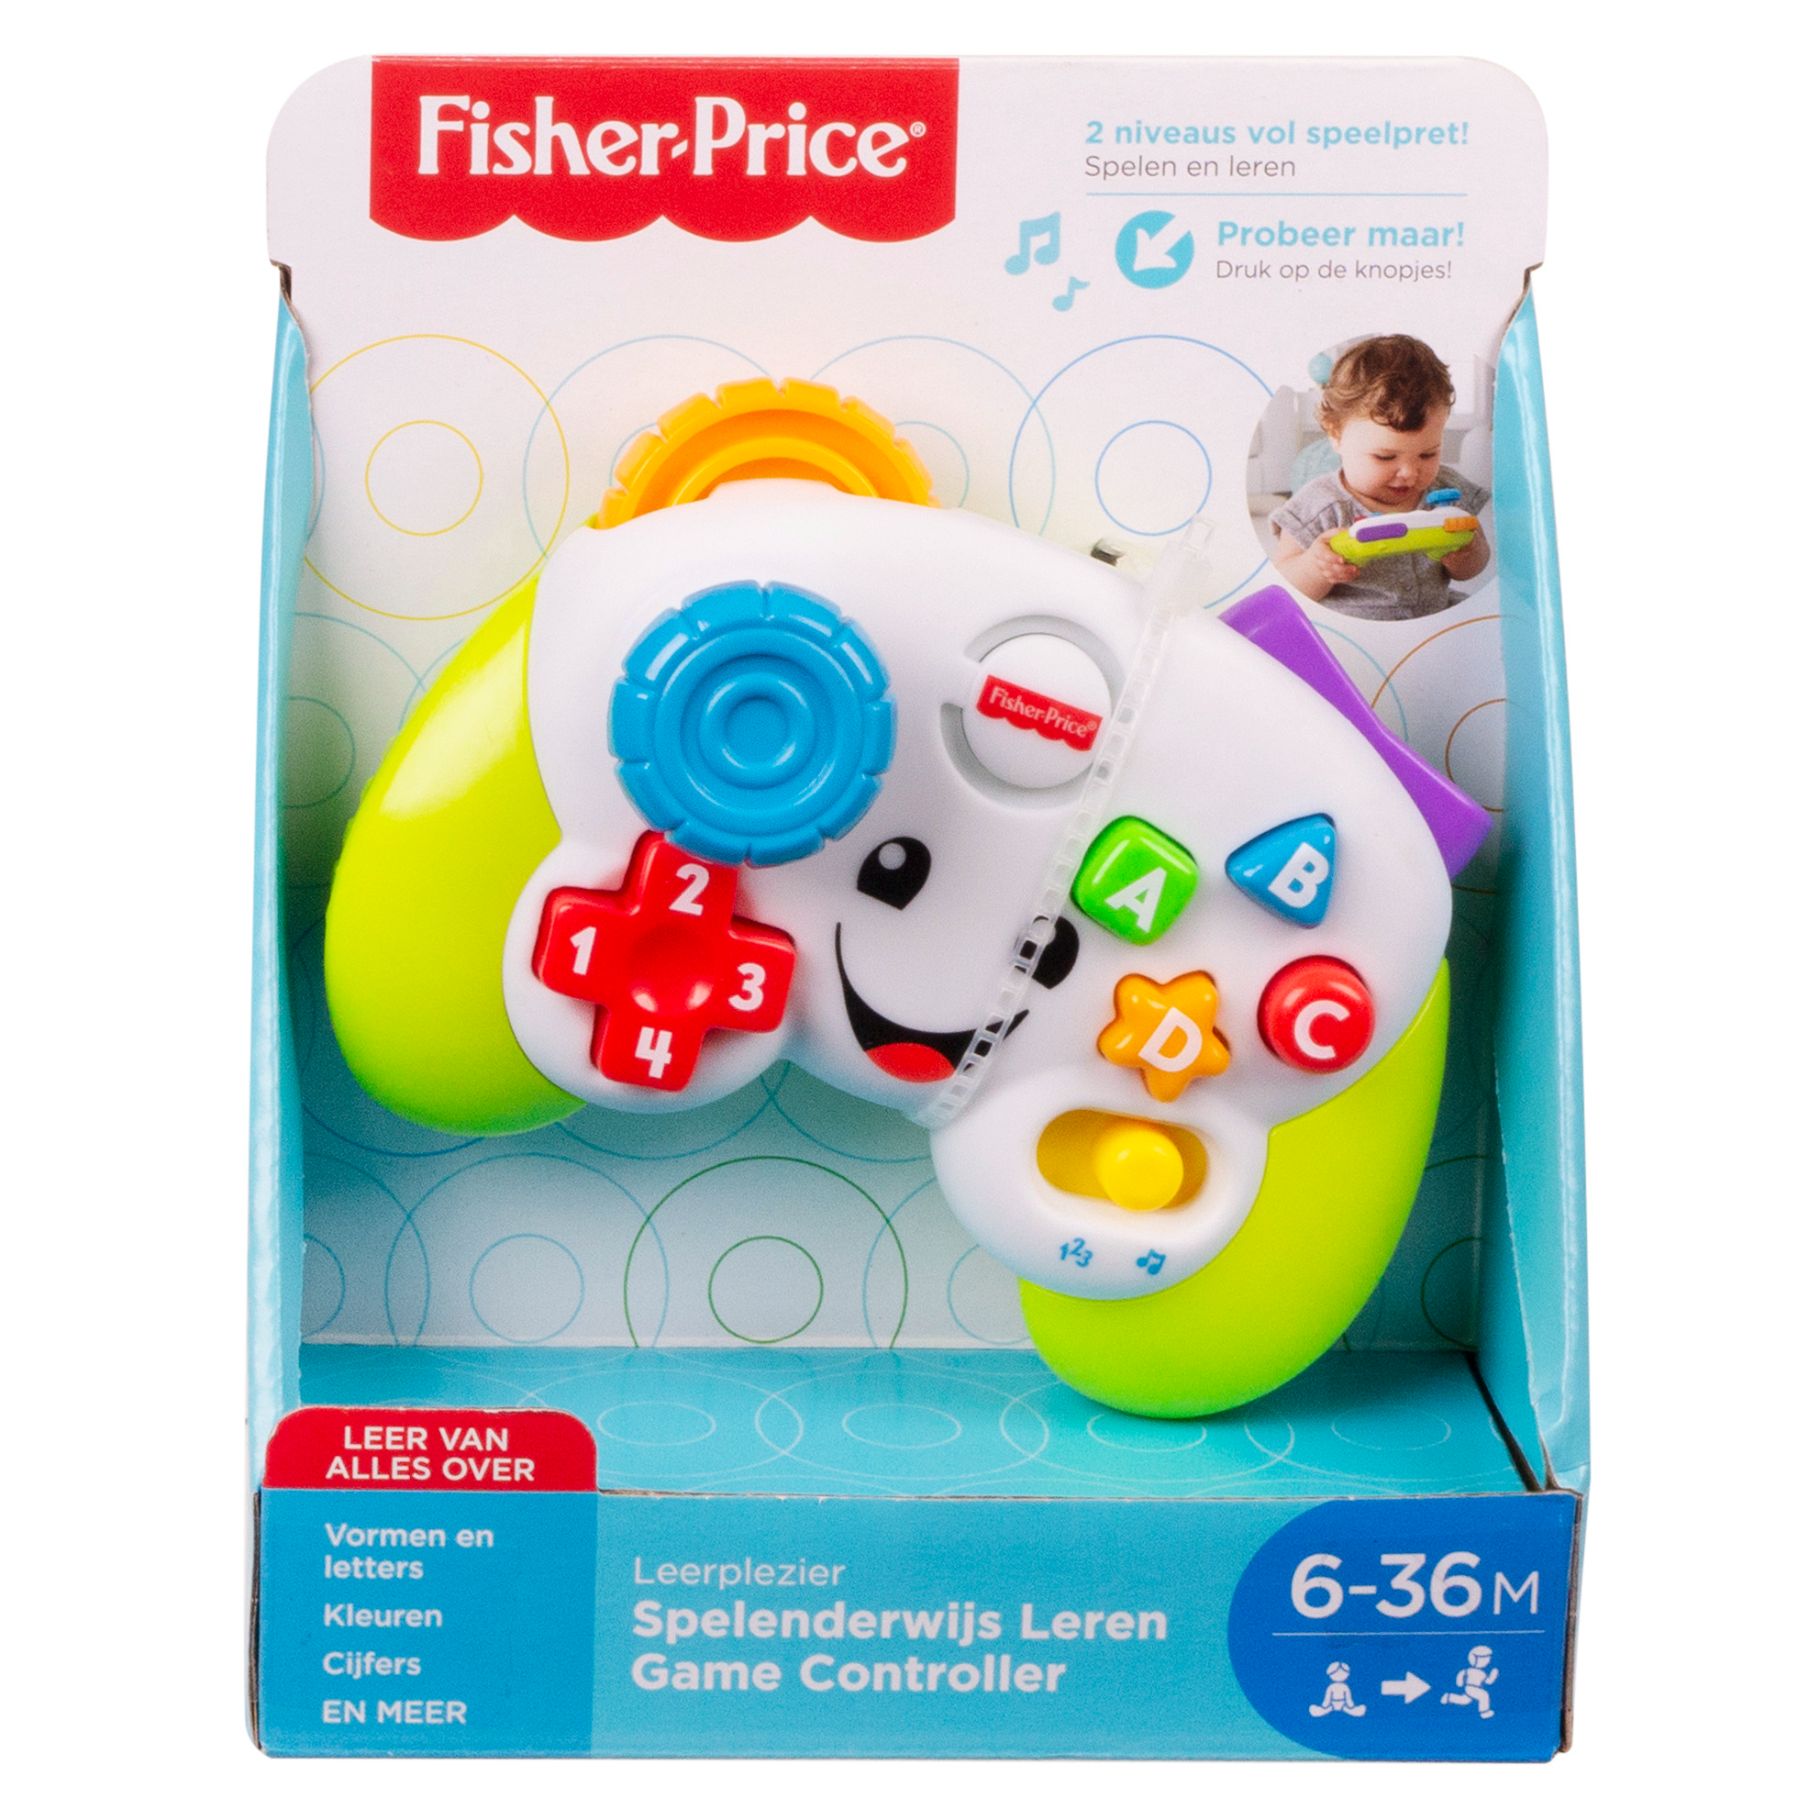 FISHER PRICE LAUGH & LEARN GAMING CONTROLLER NL